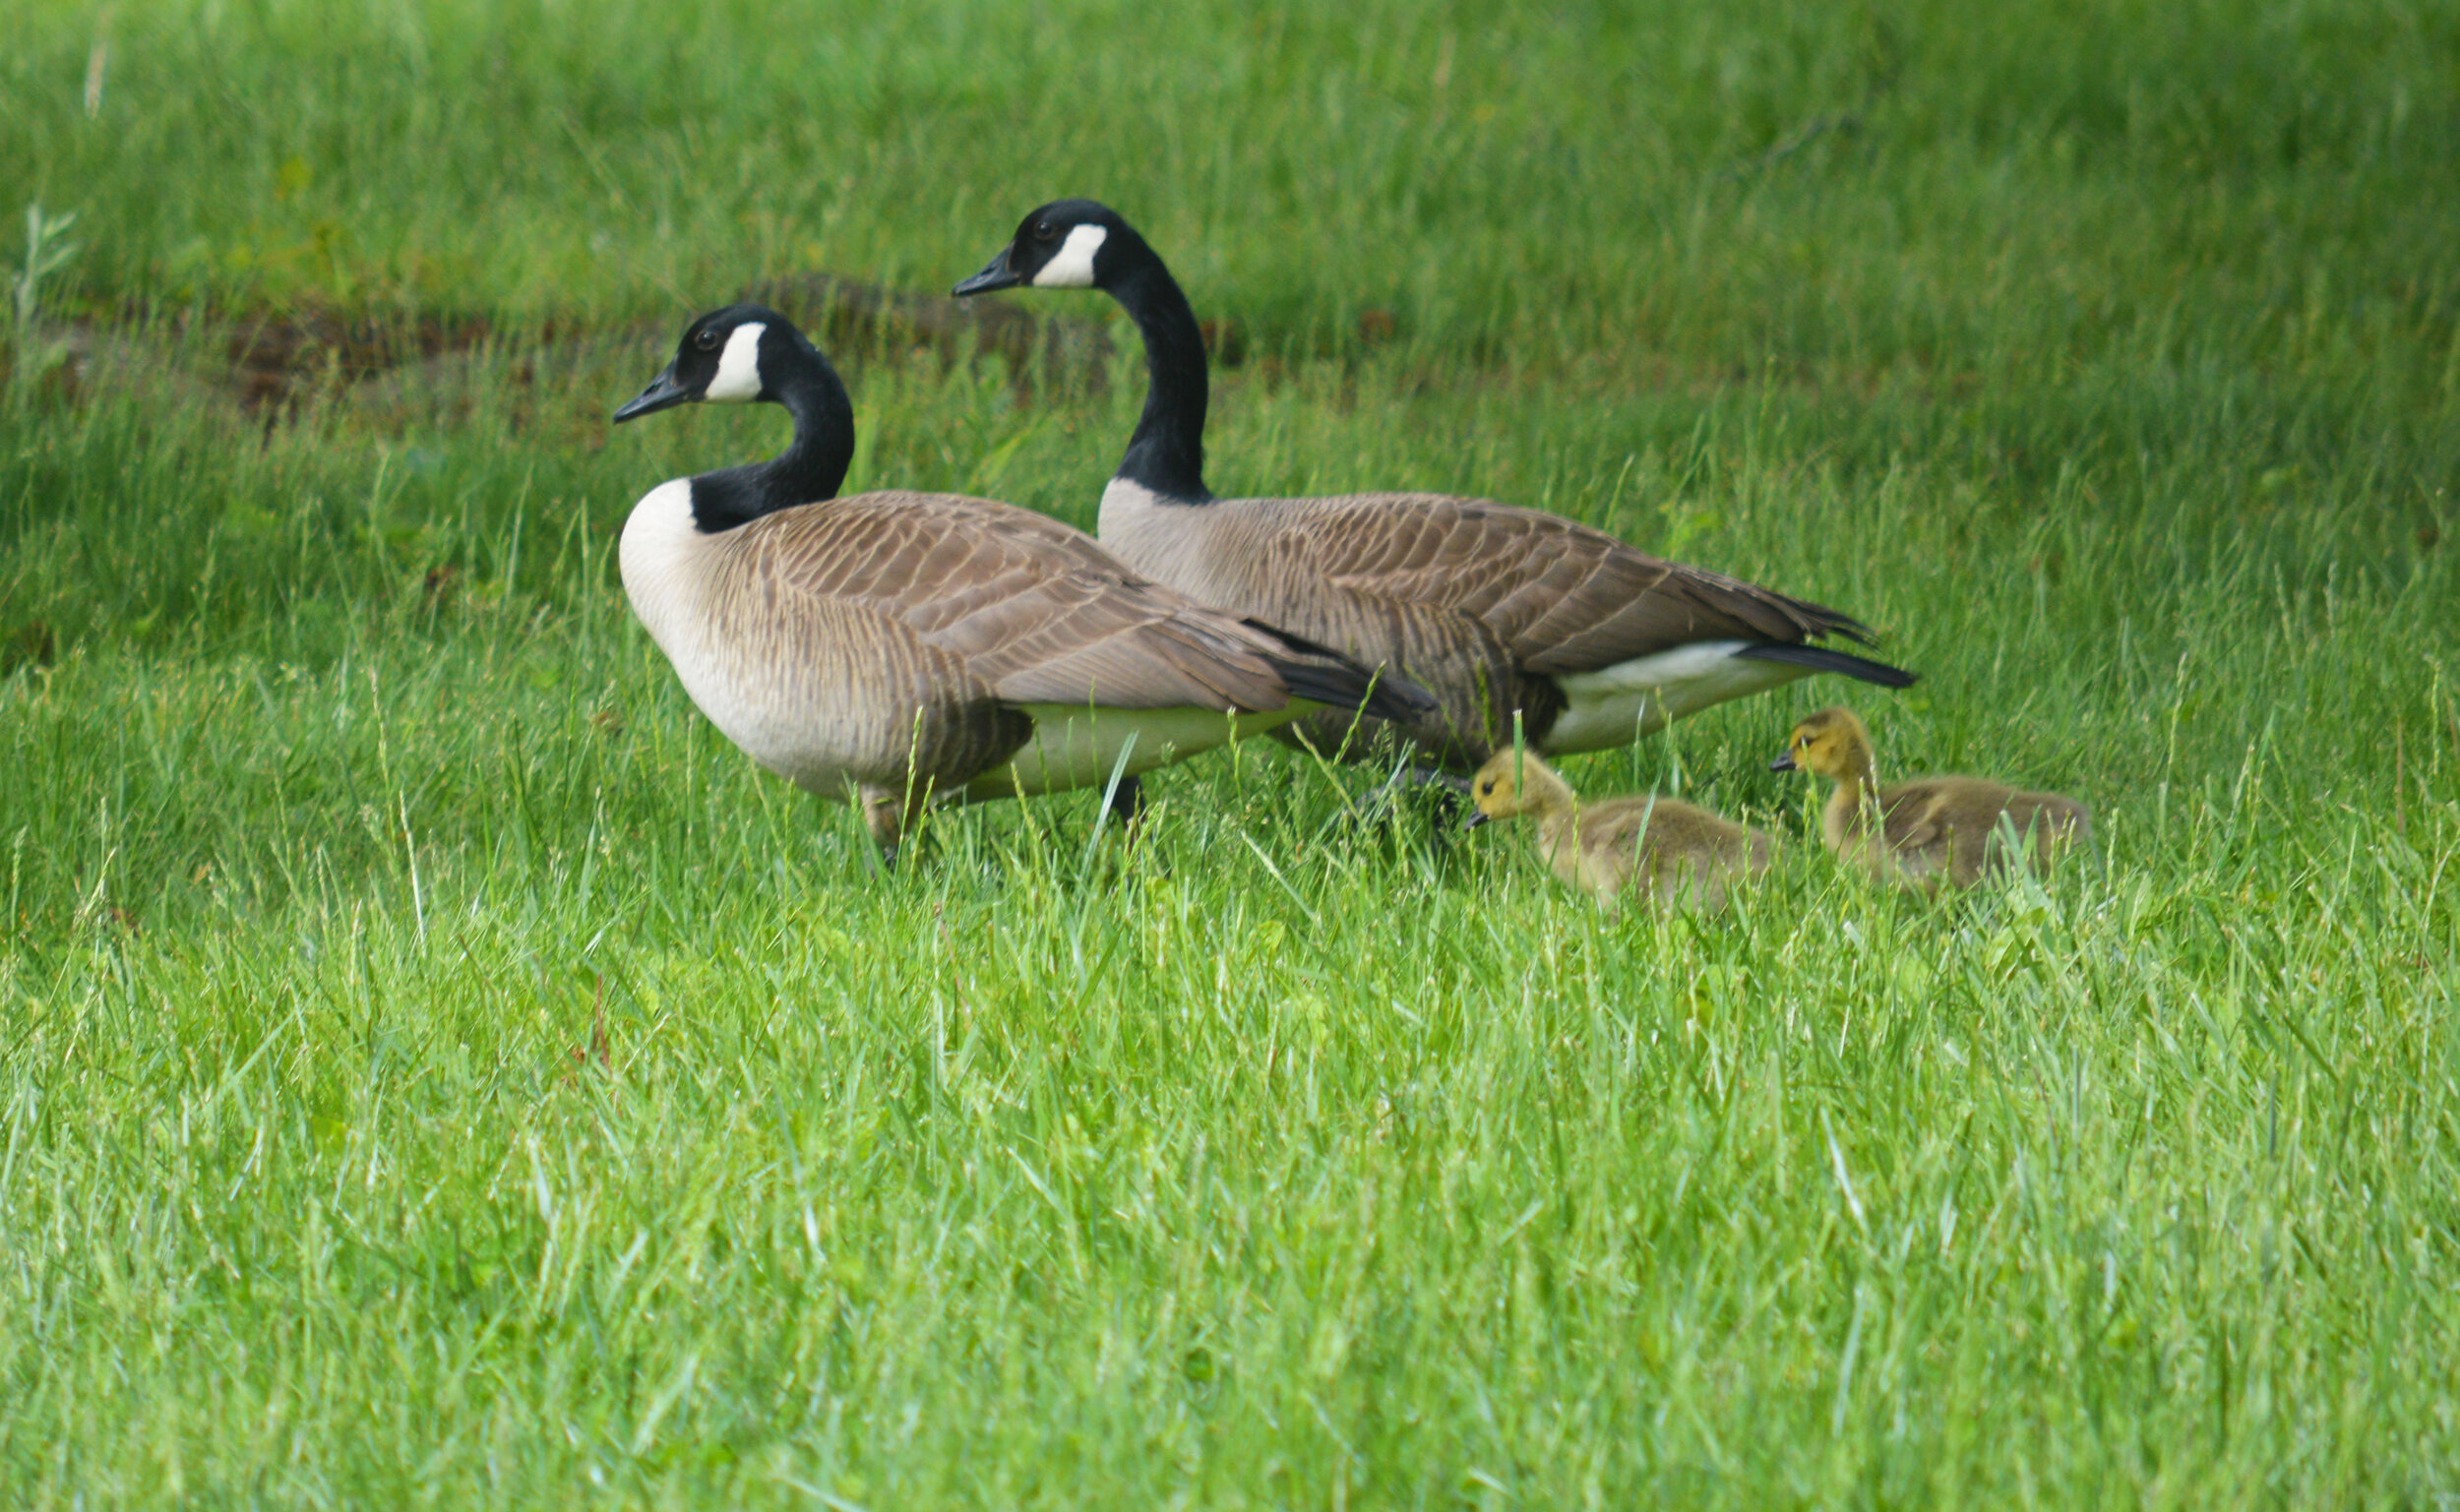  A pair of geese and their goslings enjoy the warm weather by the Springhouse Pond.  